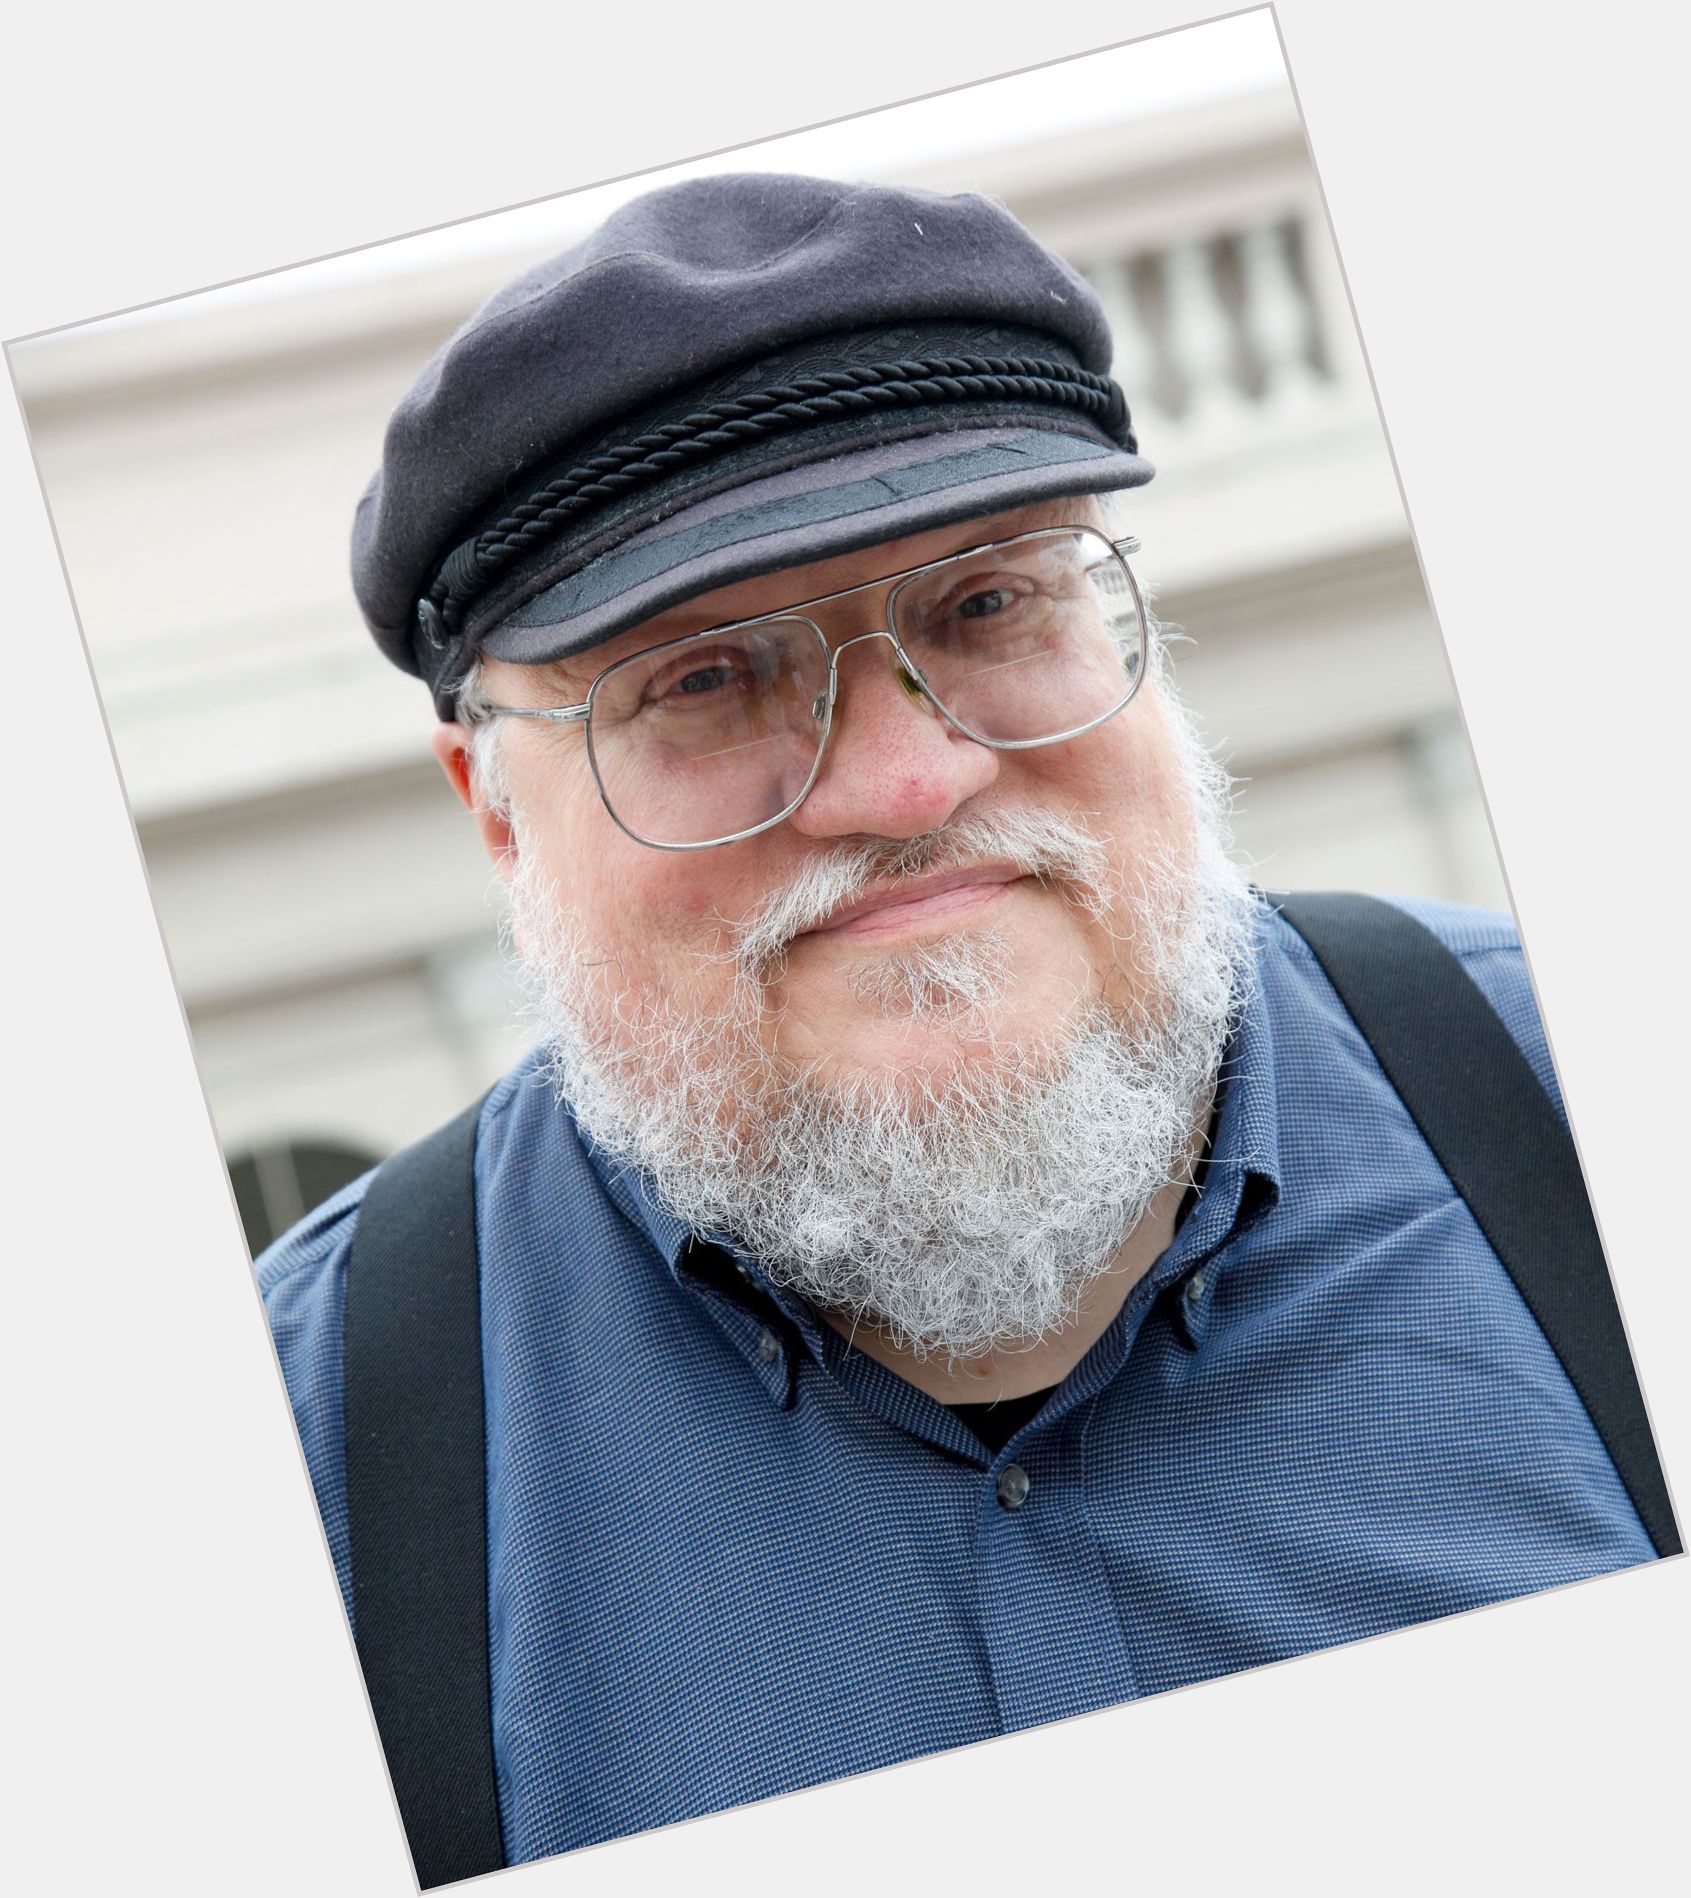 Https://fanpagepress.net/m/G/George RR Martin Exclusive Hot Pic 3